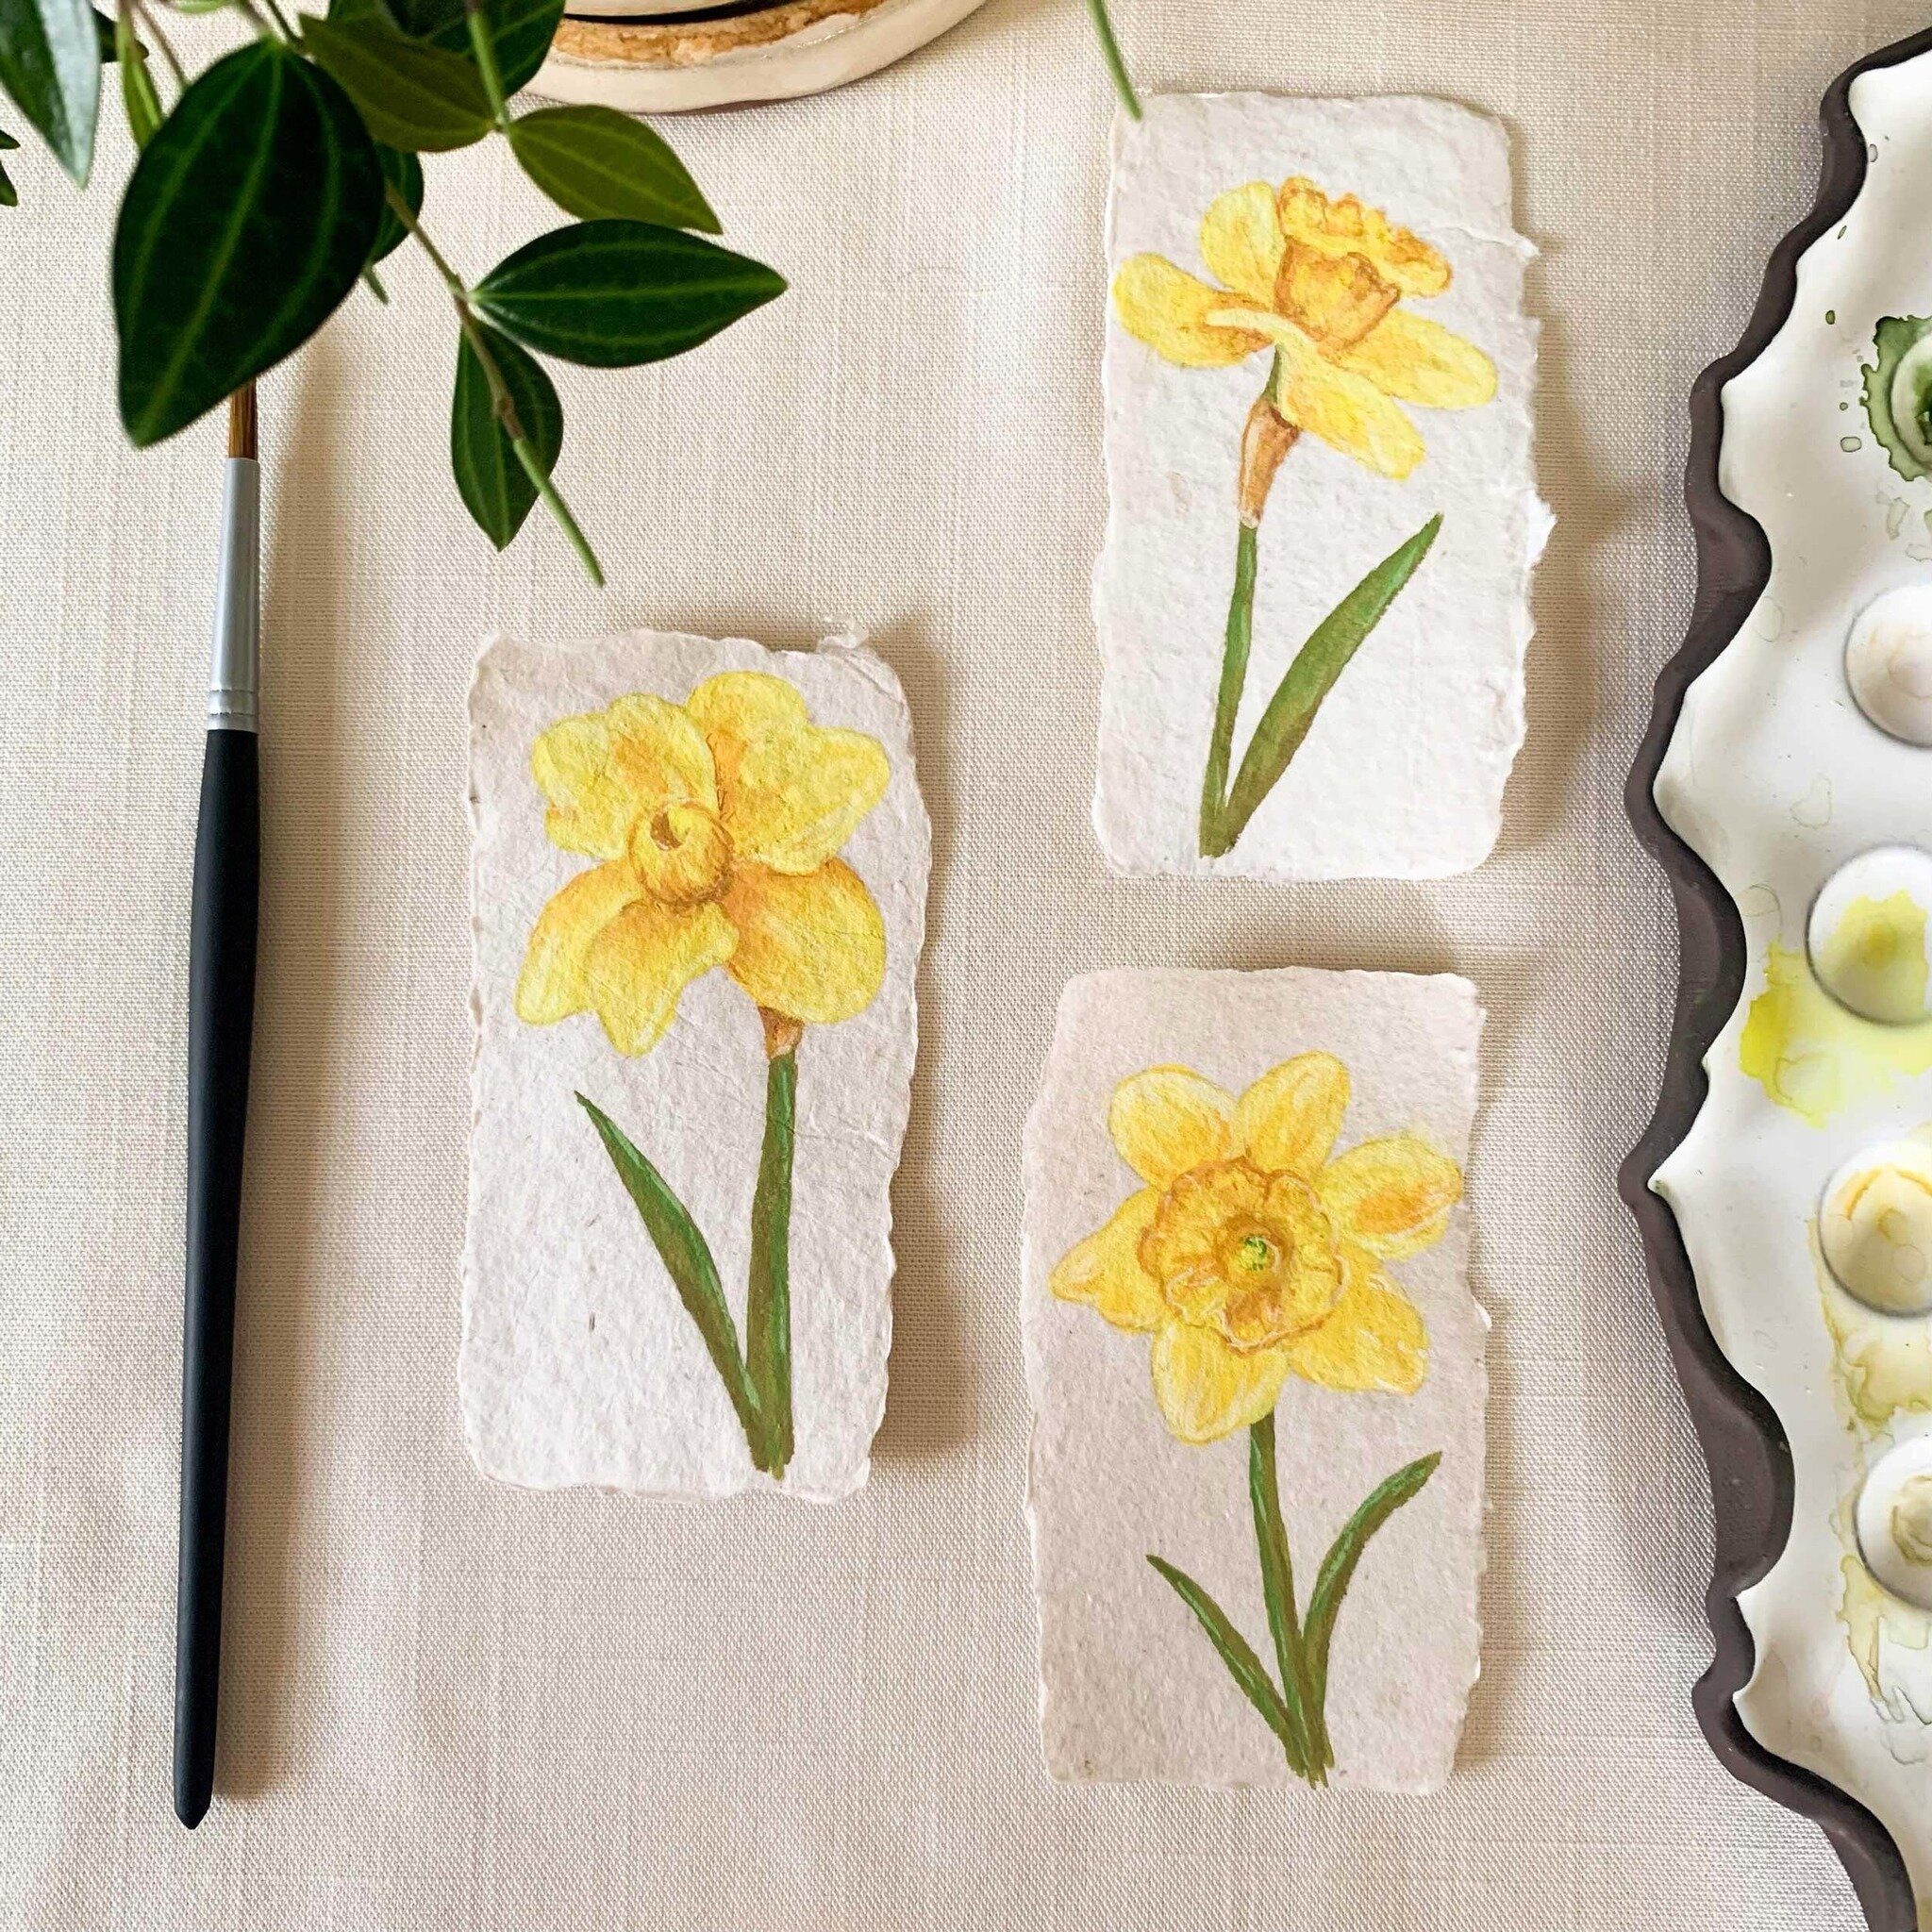 Daffodils in gouache on handmade paper. Would look beautiful hanging together in pressed glass frames.
.
Materials:
Arteza Goauche paints,
Handmade paper from @farmette.co .
.
#daffodils #springflowers #springinbloom #yellowflowers #handmadepaper #go